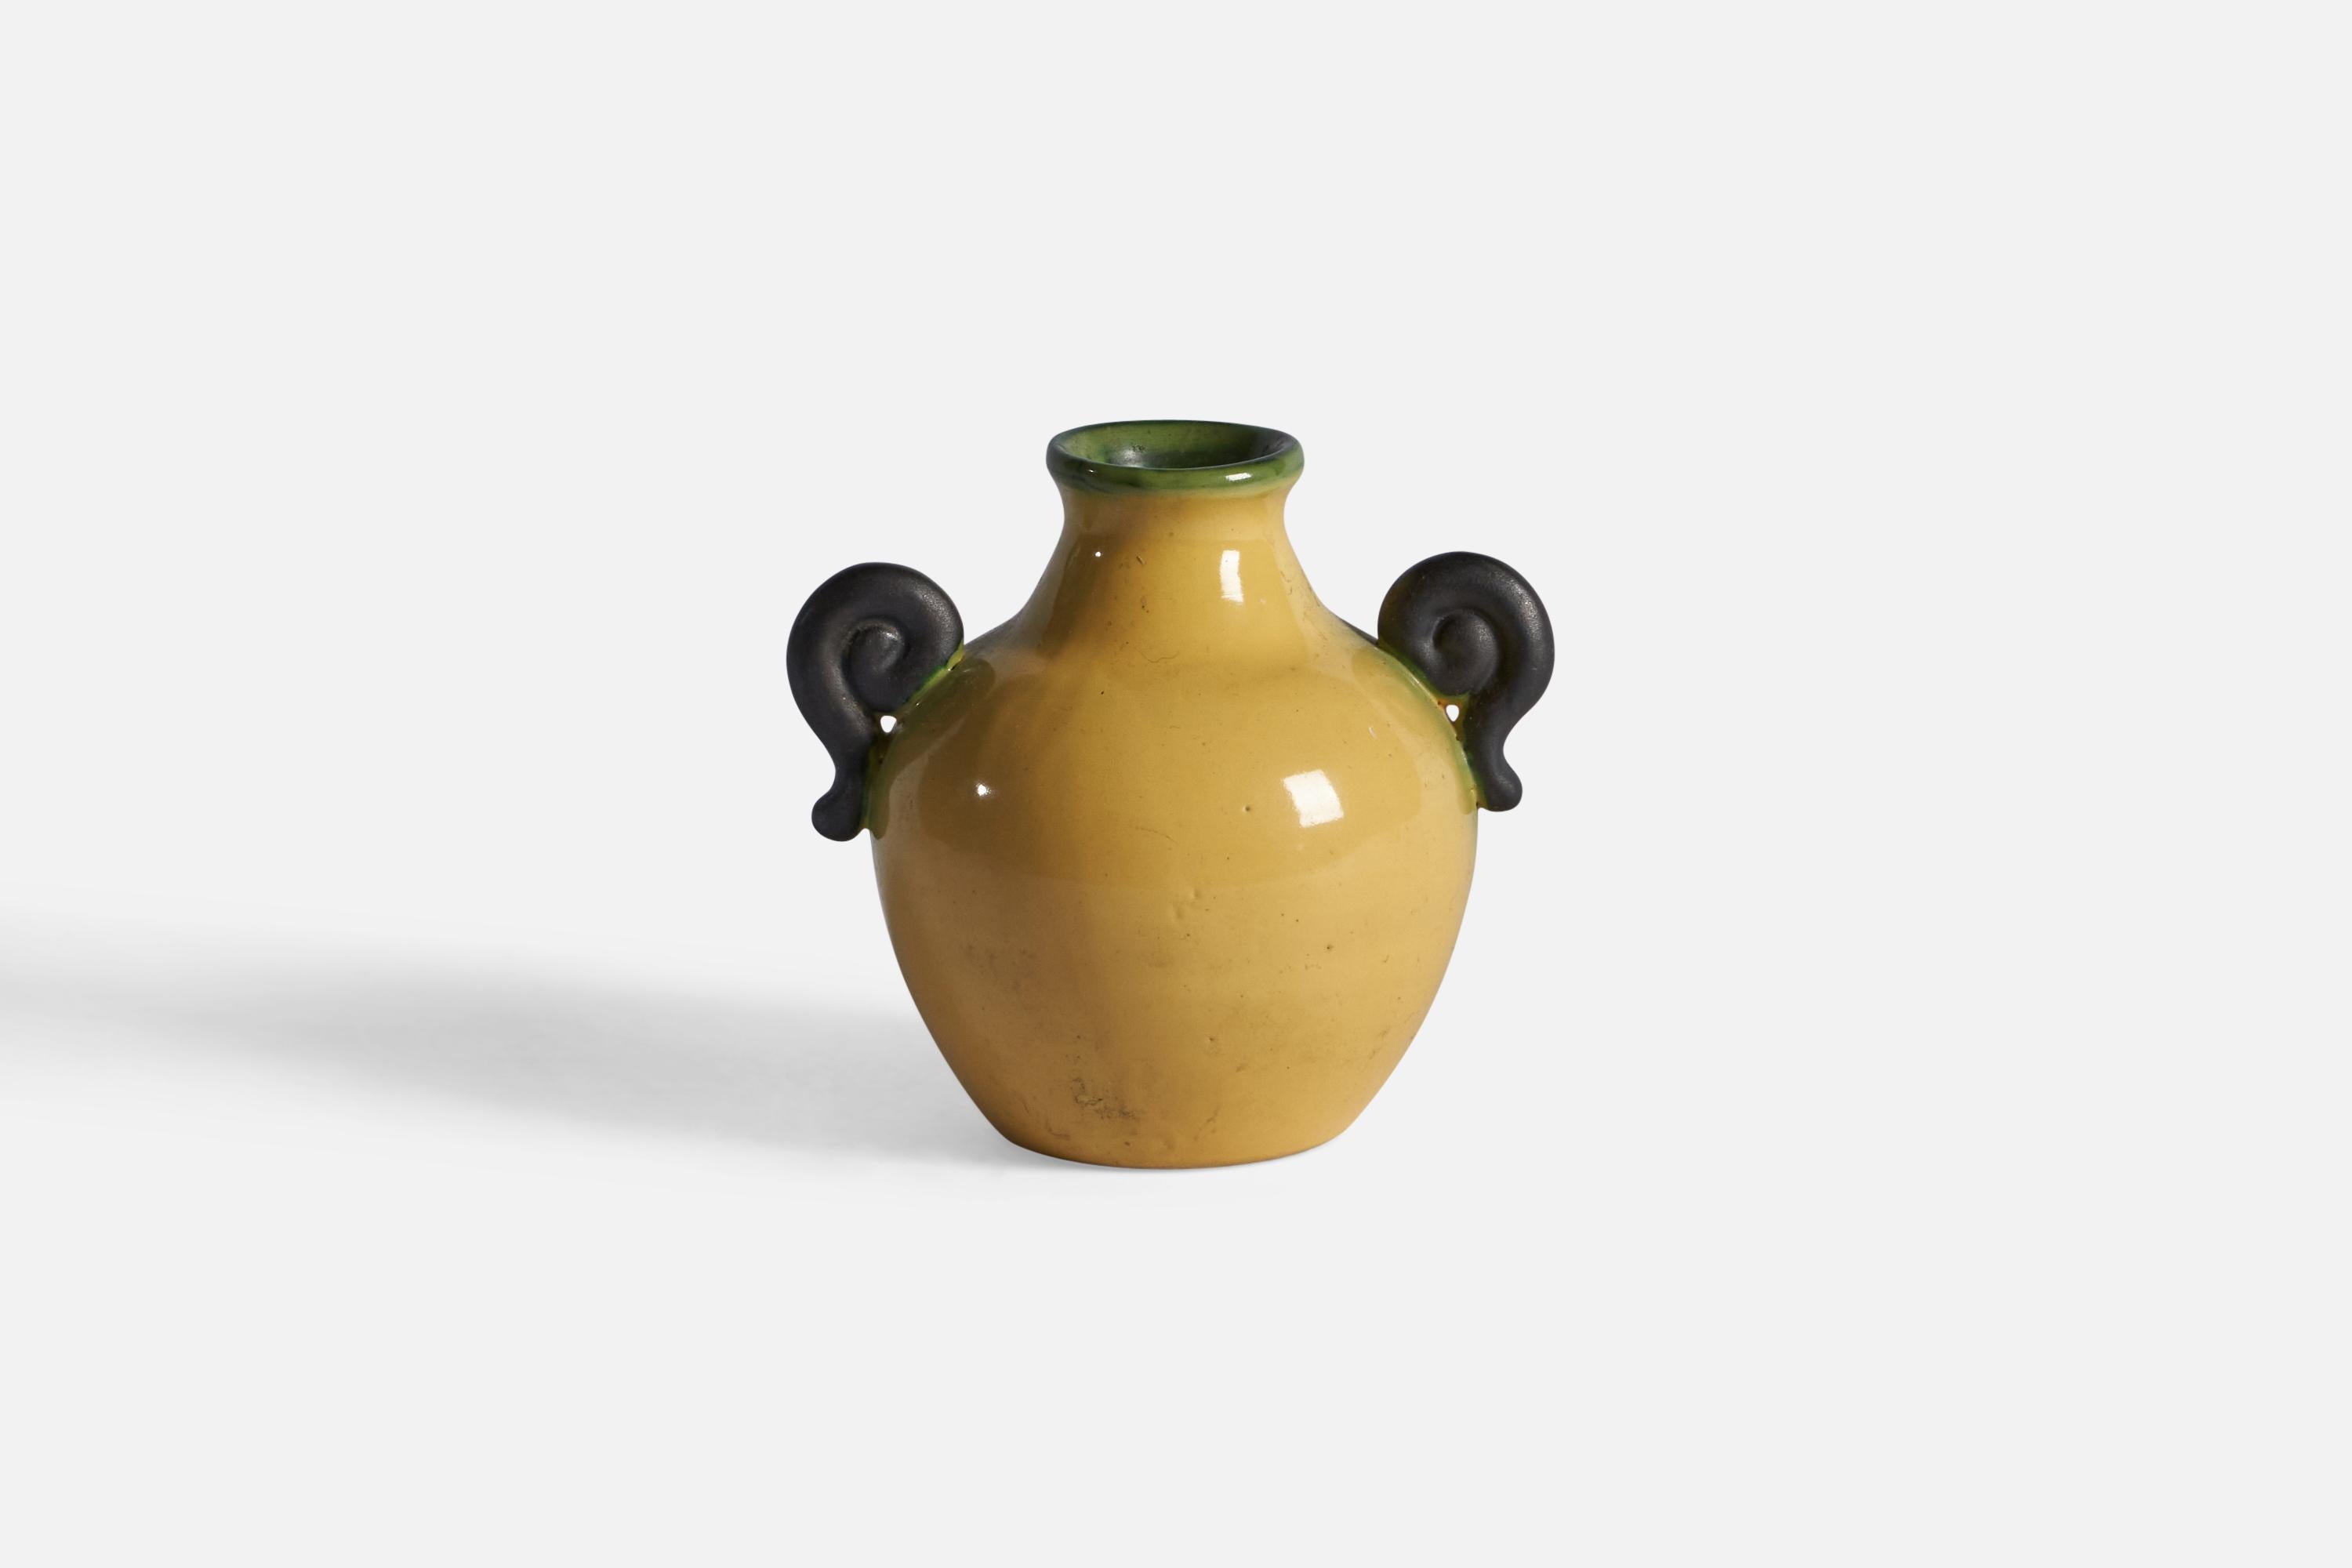 A small yellow and green-glazed earthenware vase designed by Eva Jancke-Björk and produced by Bo Fajans, Sweden, c. 1940s.